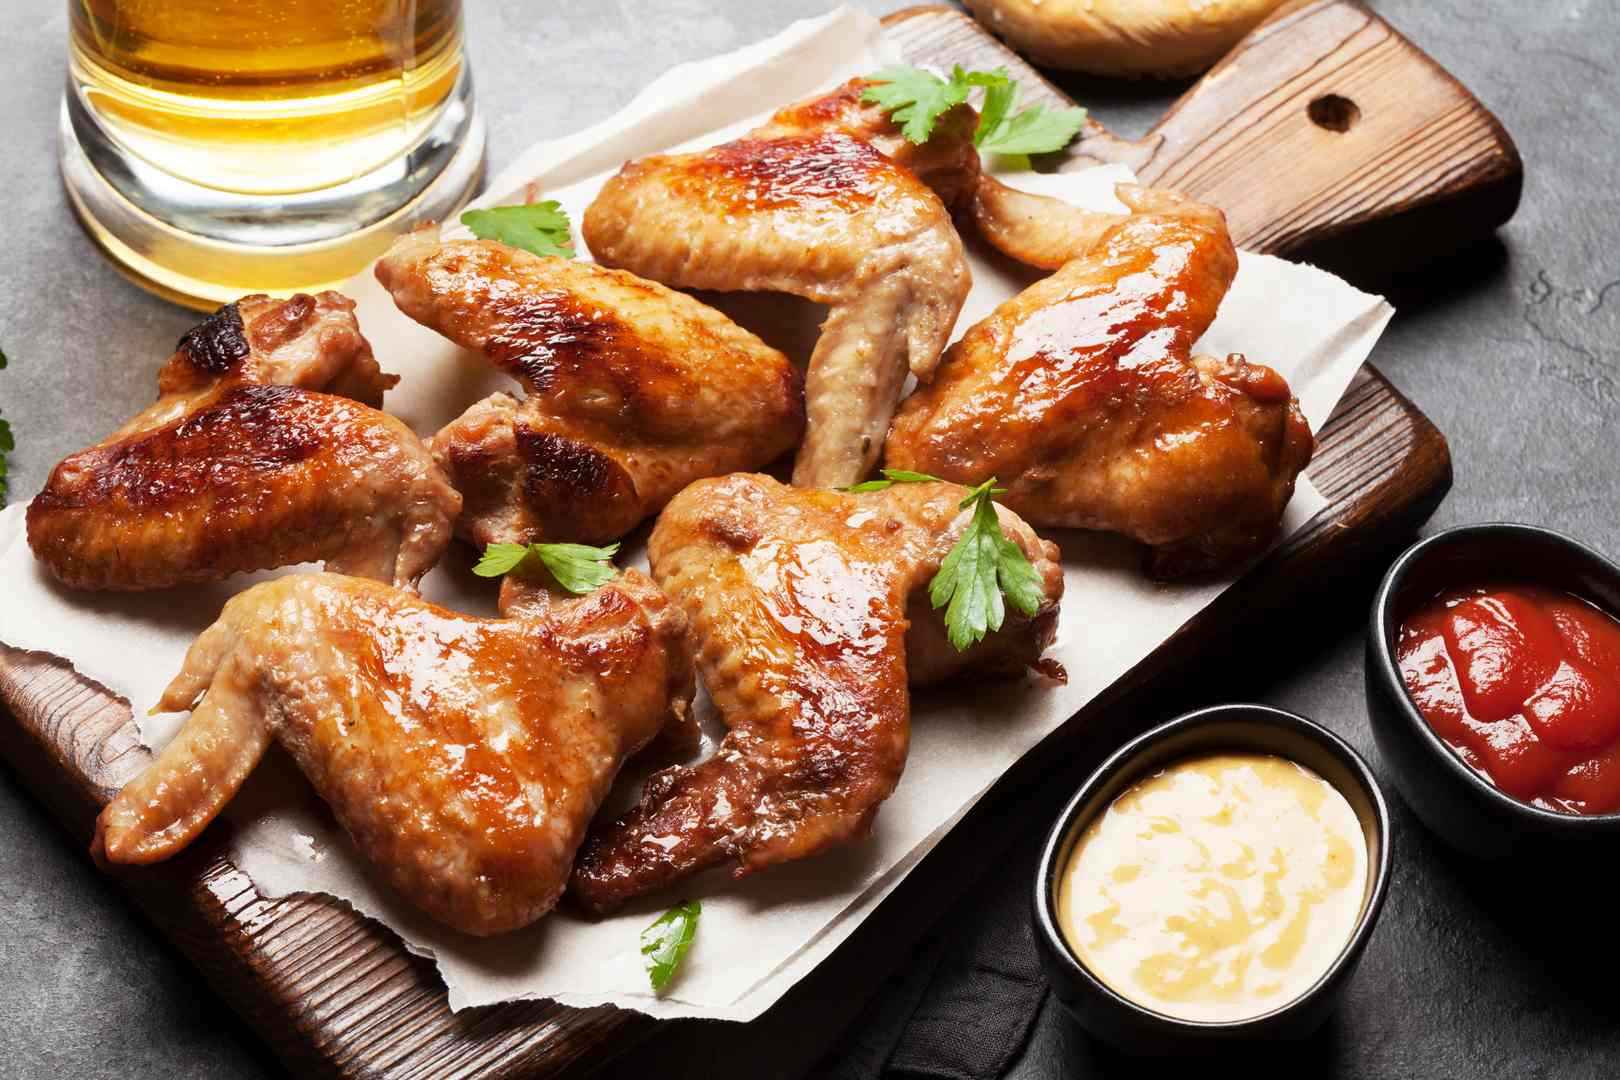 Hot barbecue chicken wings with sauce and draft beer.